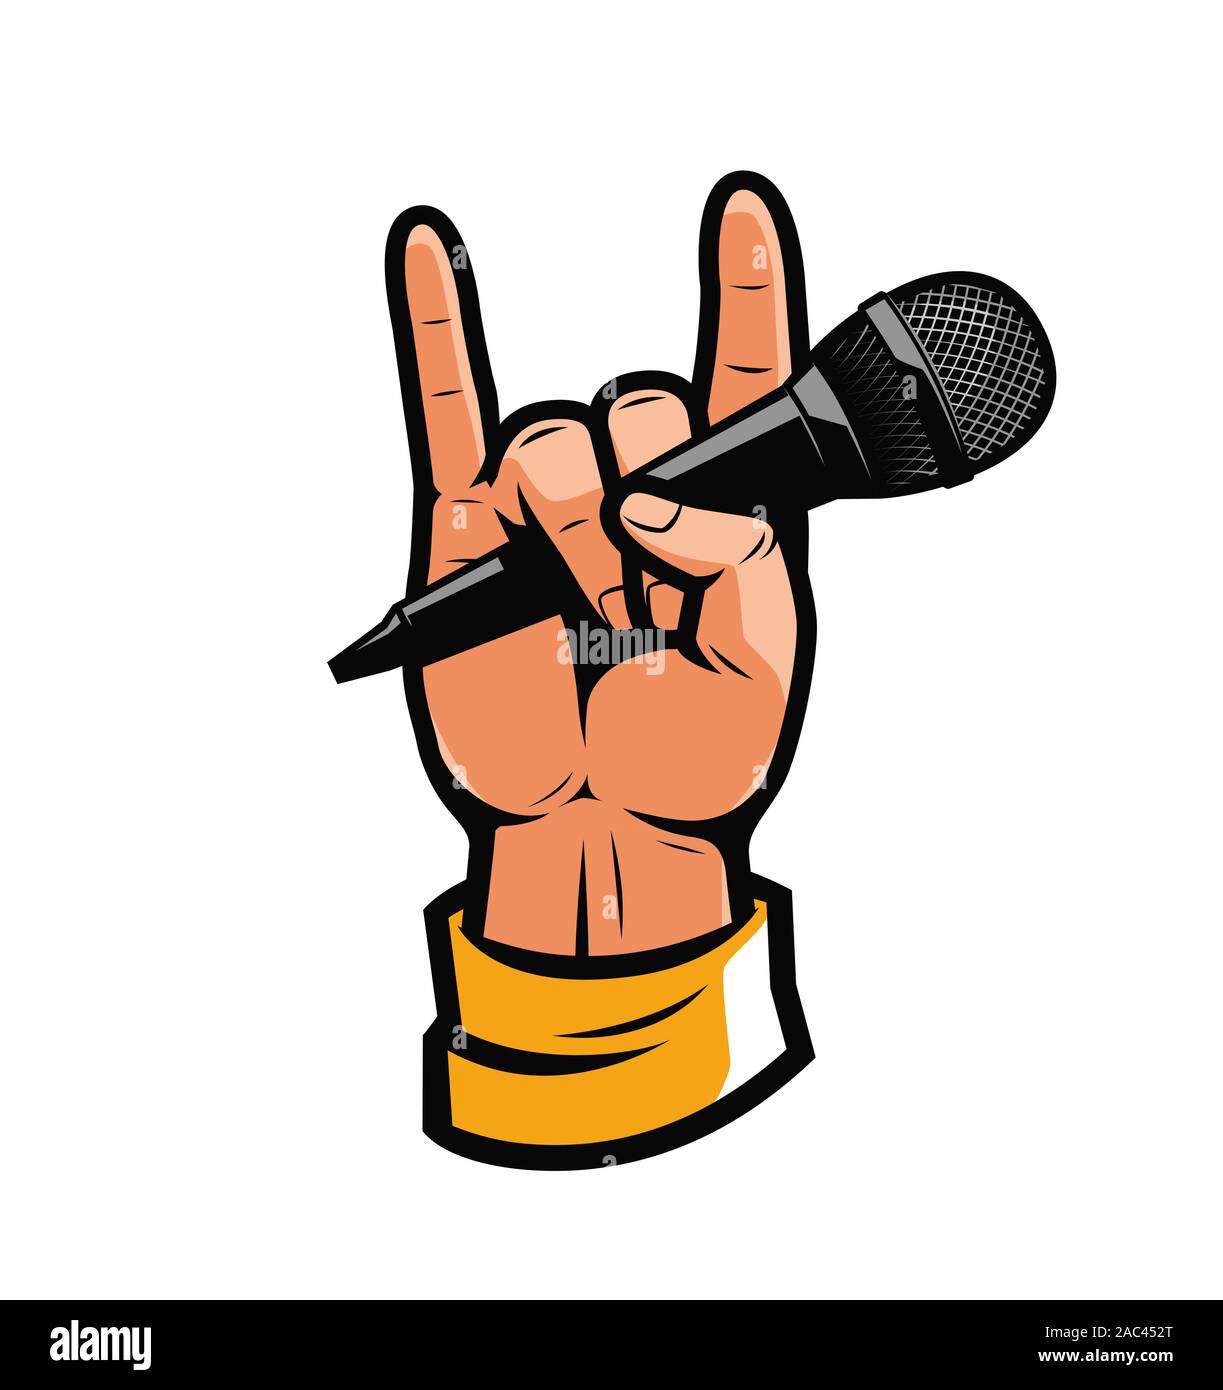 Hand with microphone. Music, concert symbol. Vector illustration Stock Vector